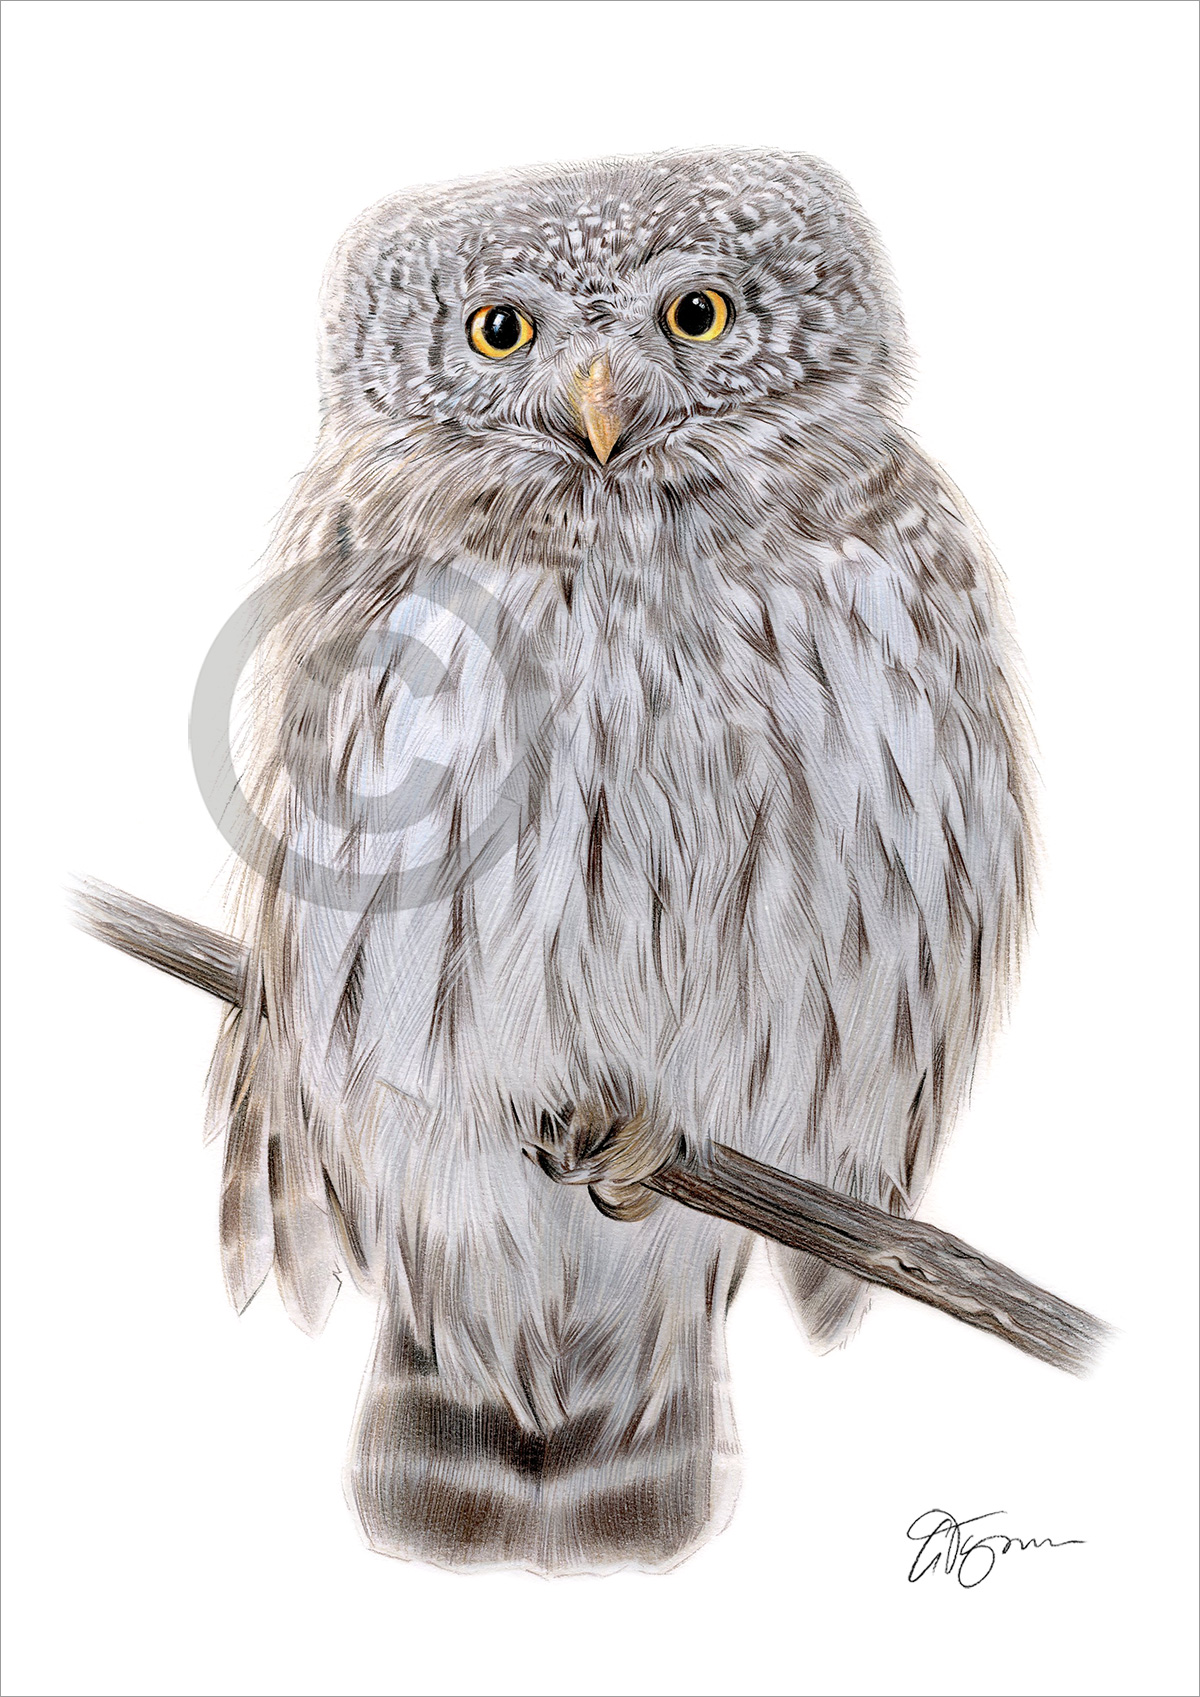 Colour pencil drawing of a pygmy owl by artist Gary Tymon